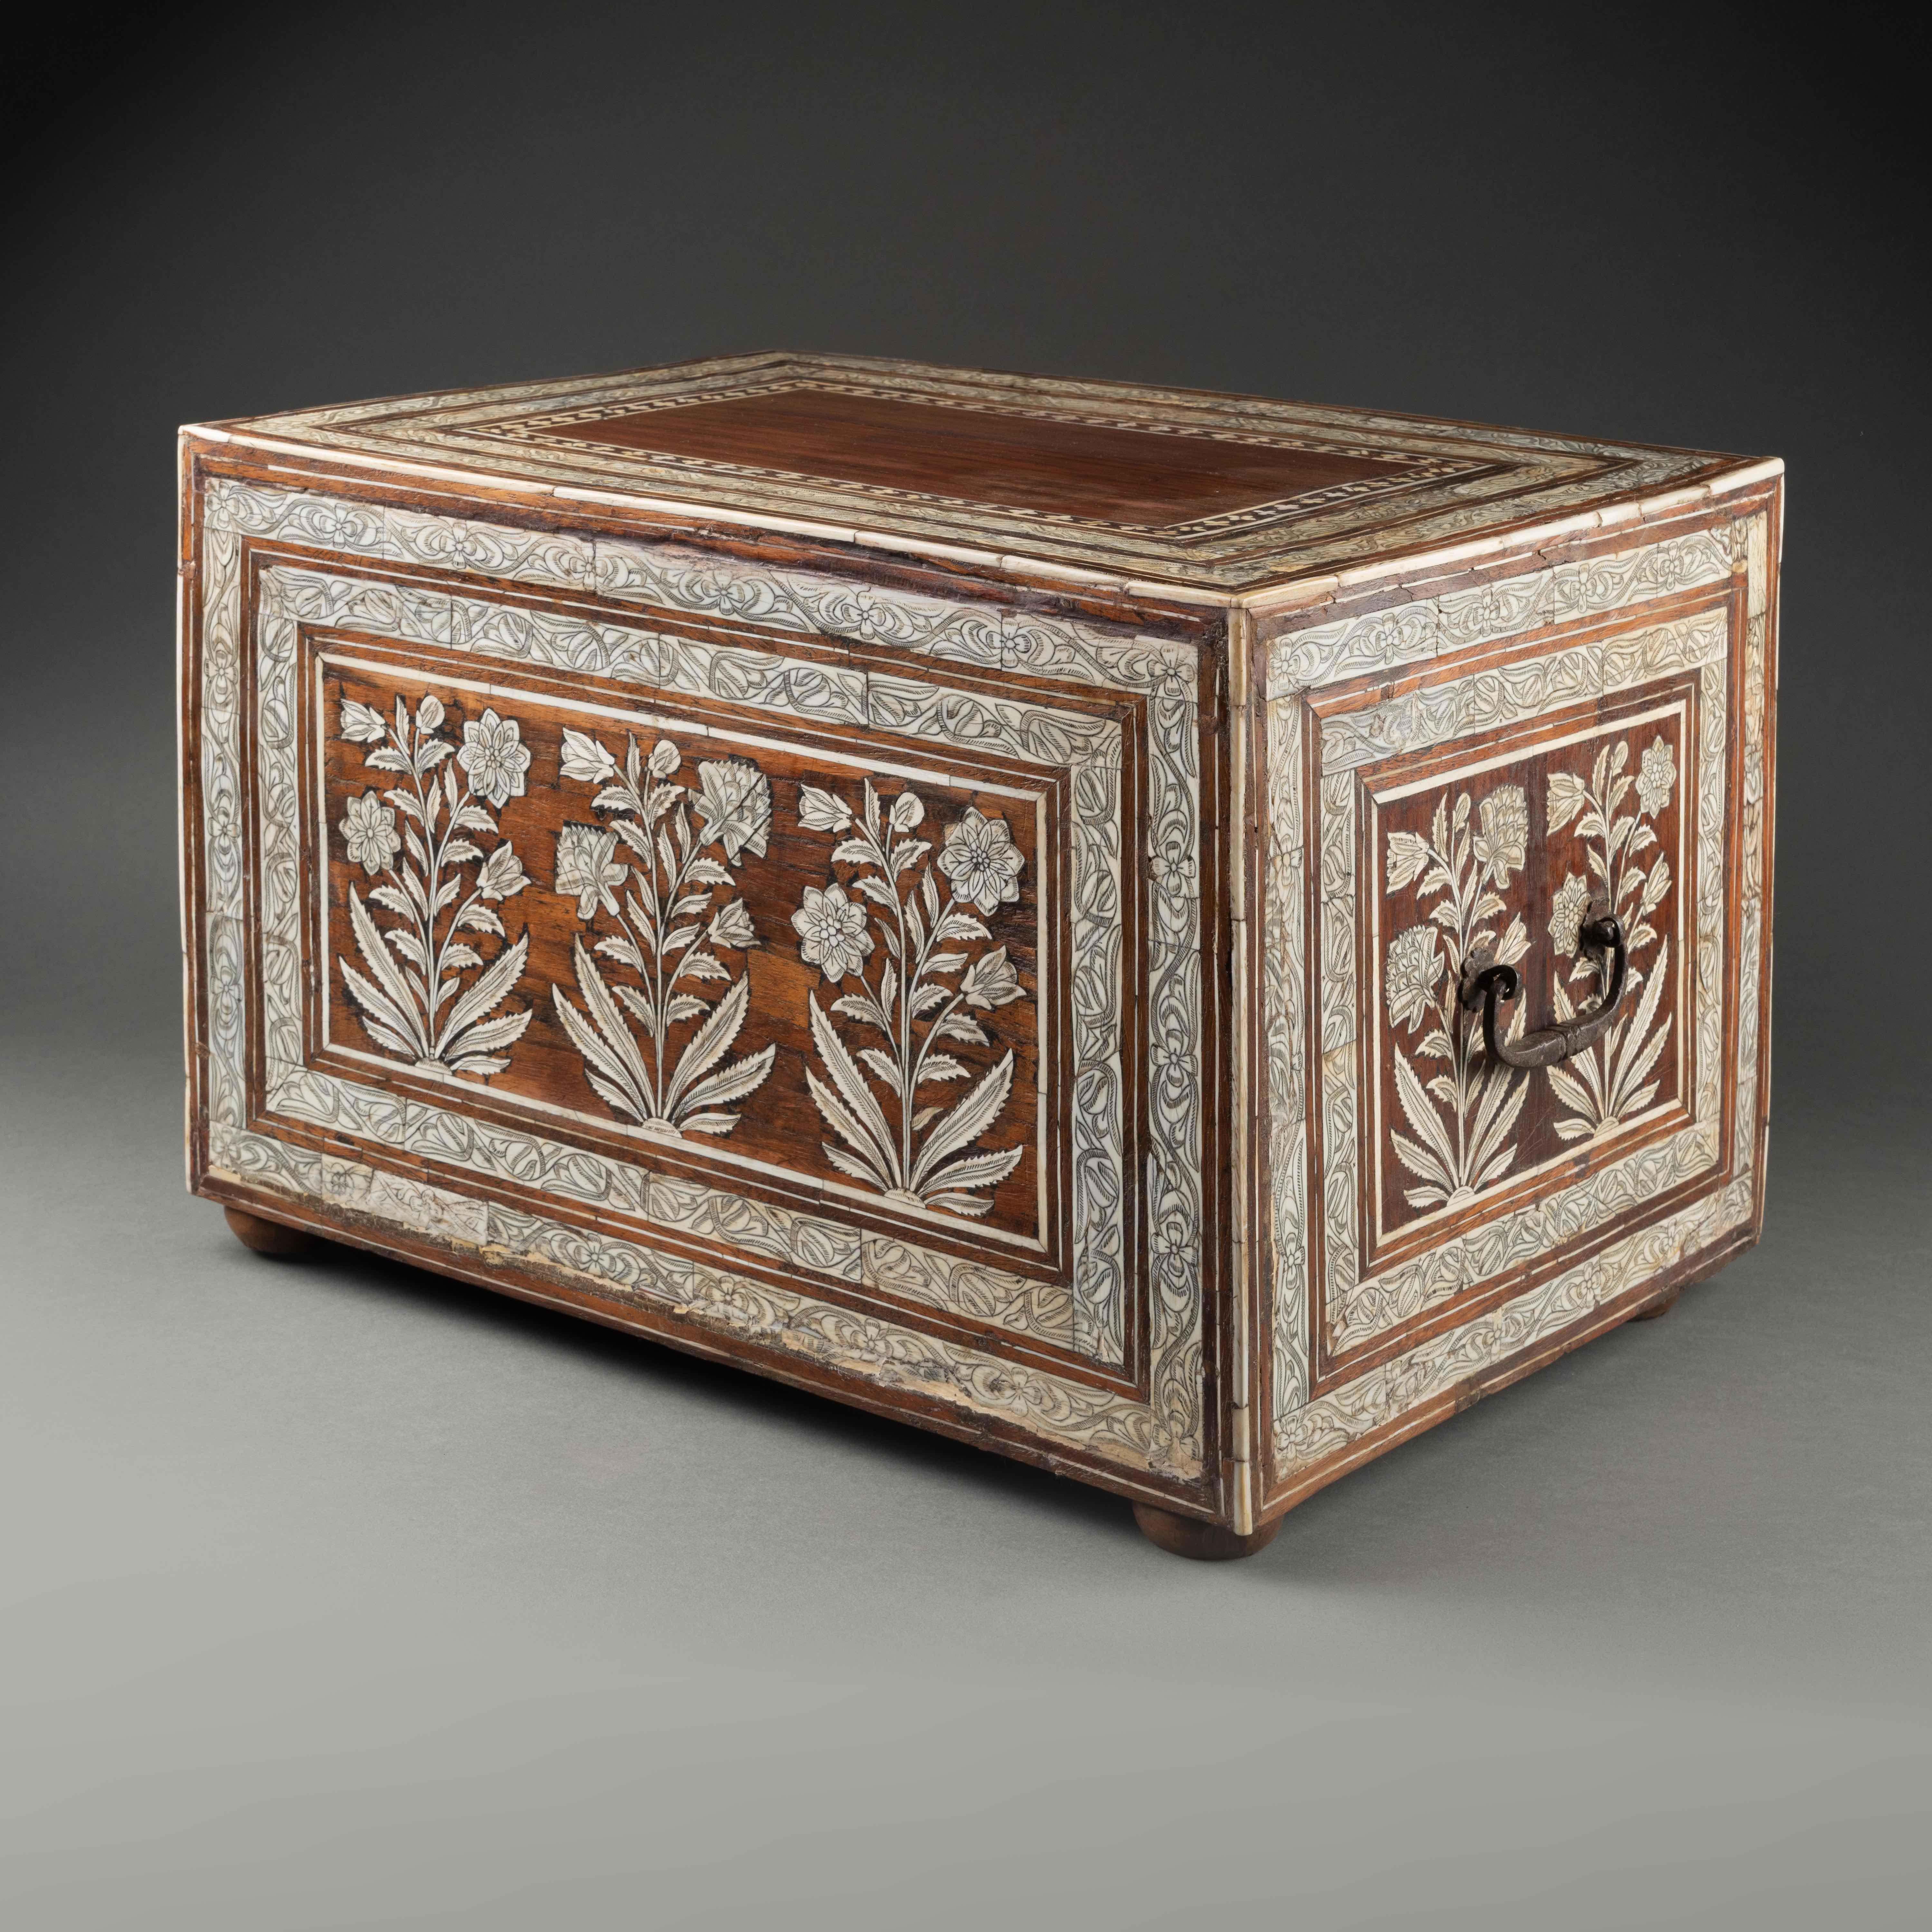 Anglo-Indian Mughal Ivory Inlaid Wood Cabinet, 17th Century For Sale